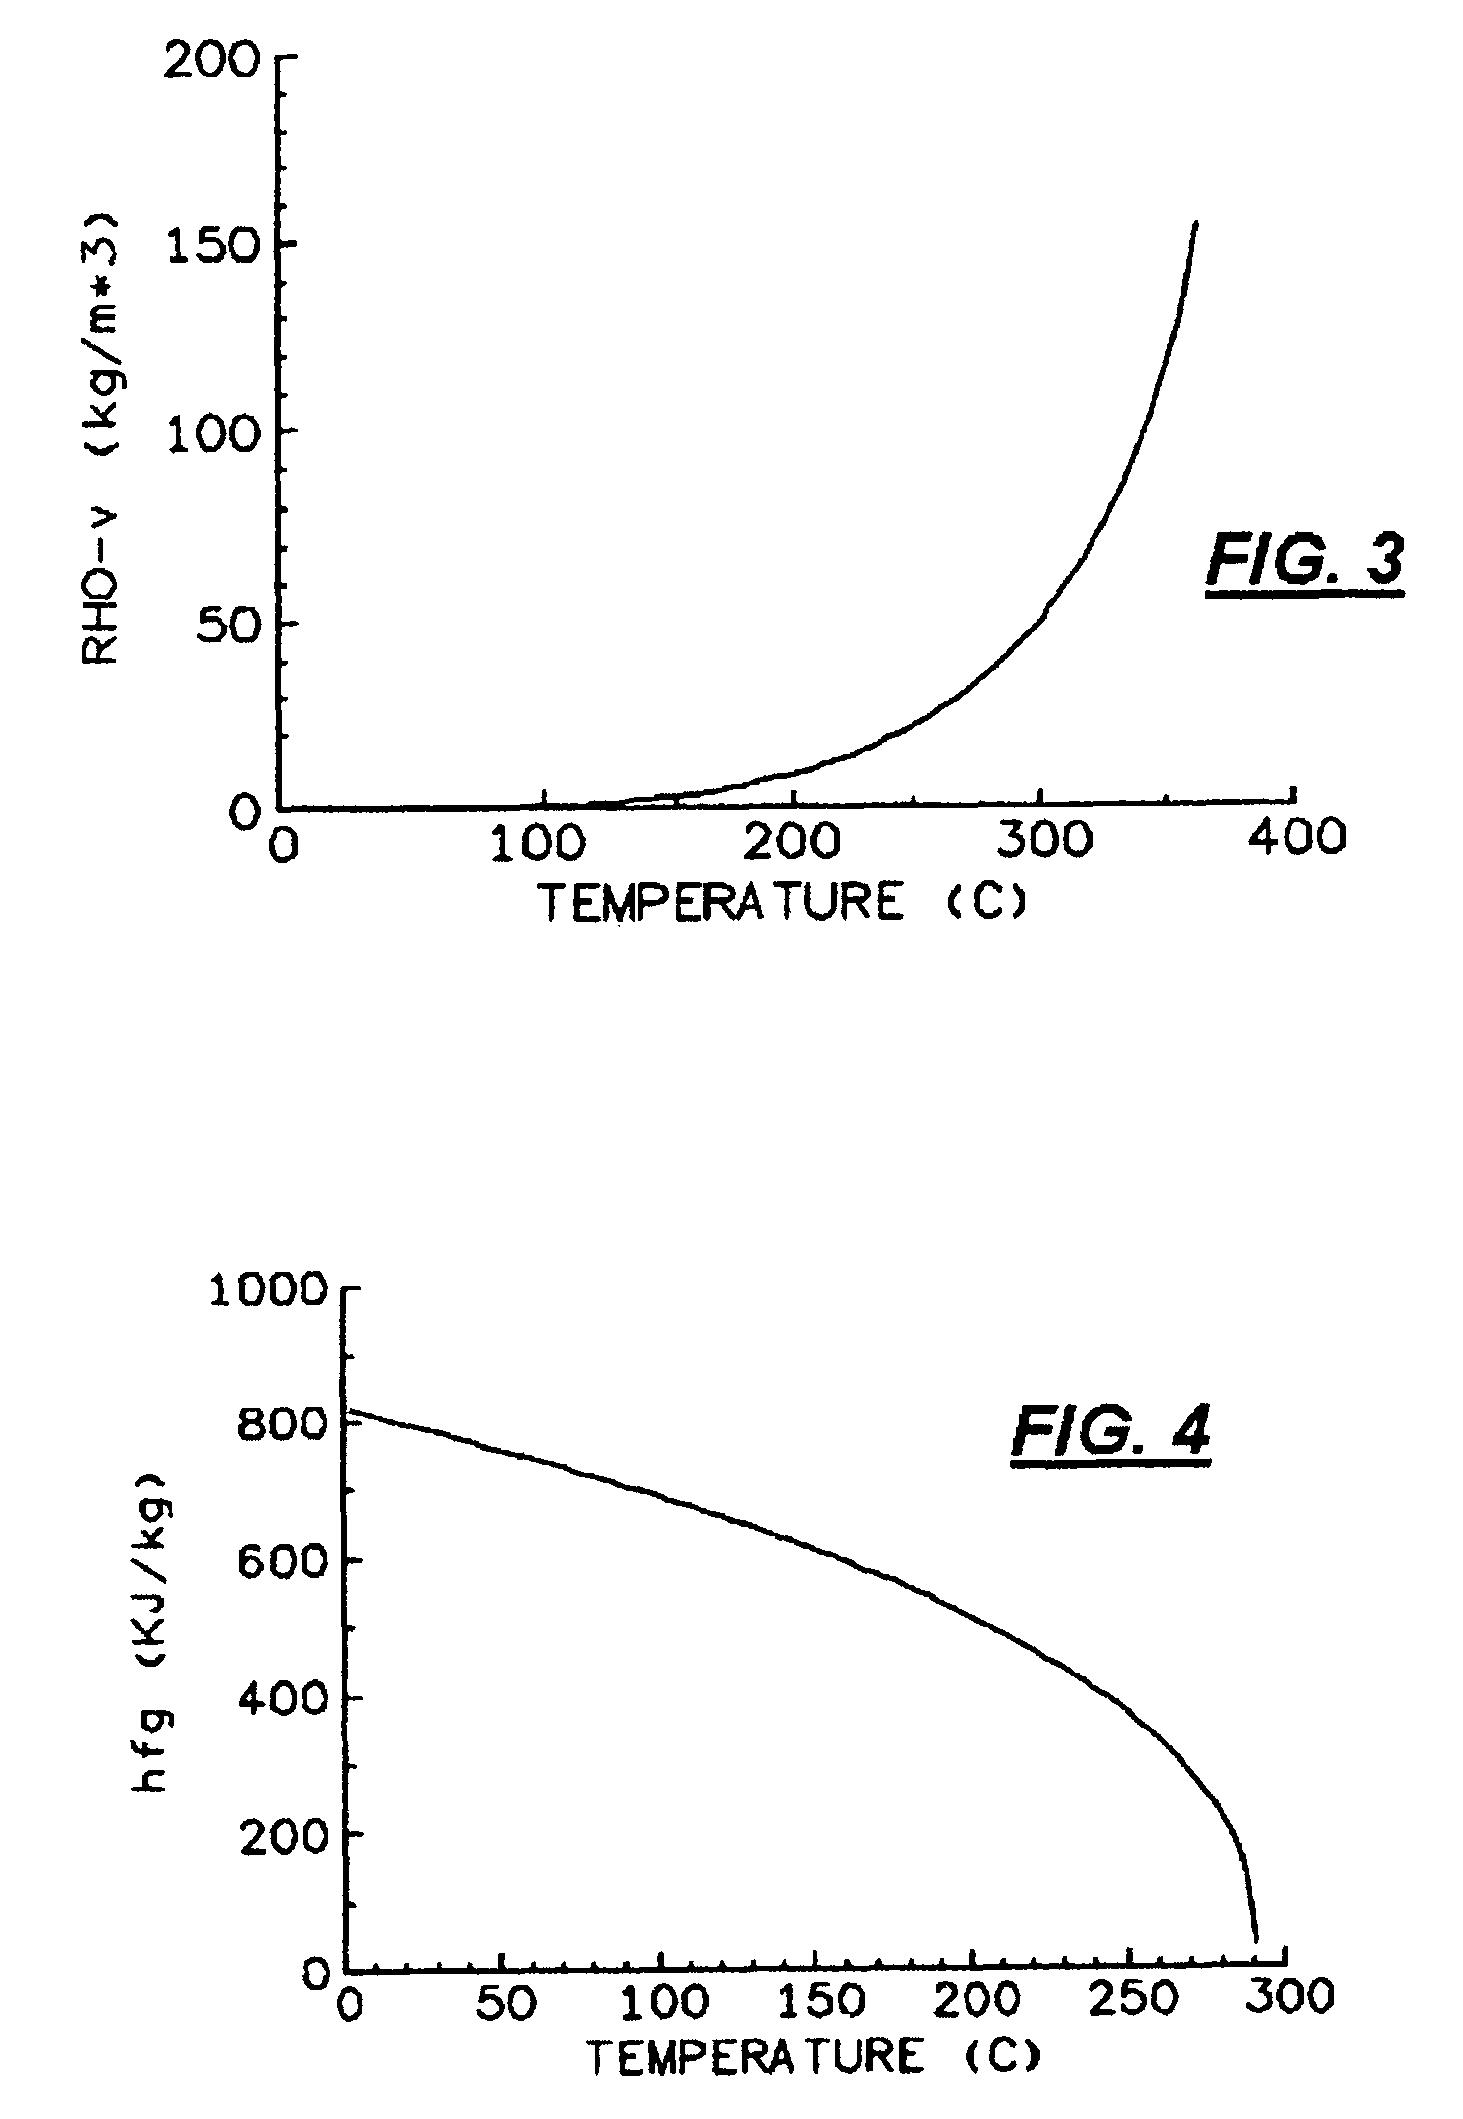 UV-curable coatings and methods for applying UV-curable coatings using thermal micro-fluid ejection heads